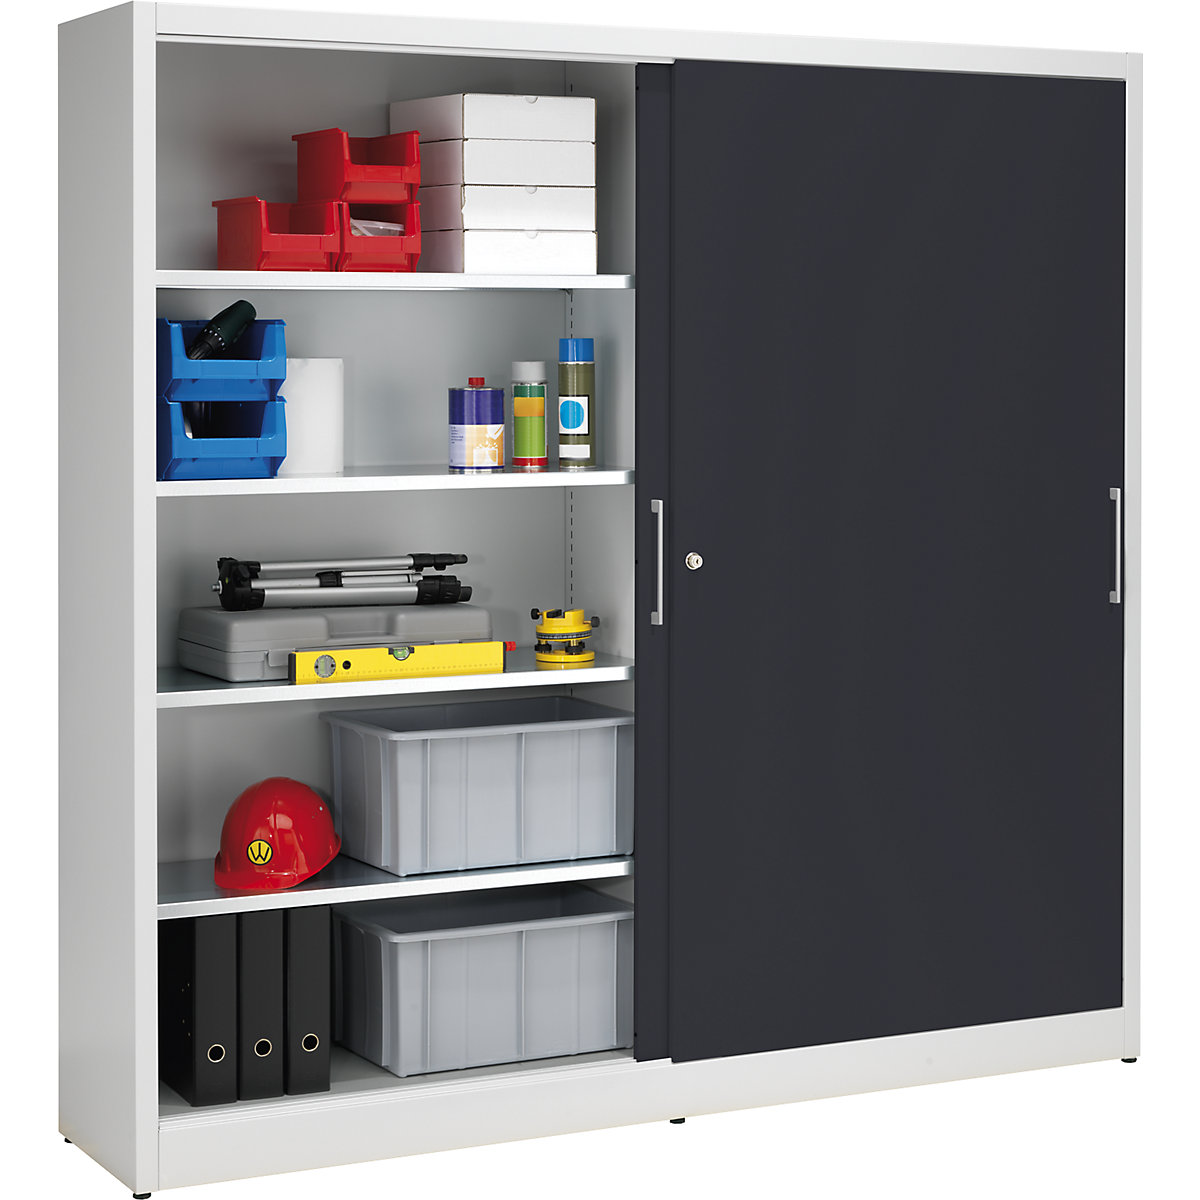 Sliding door cupboard, height 1950 mm – eurokraft pro, with centre partition and 2 x 4 shelves, width 2000 mm, depth 420 mm, doors charcoal RAL 7016-5